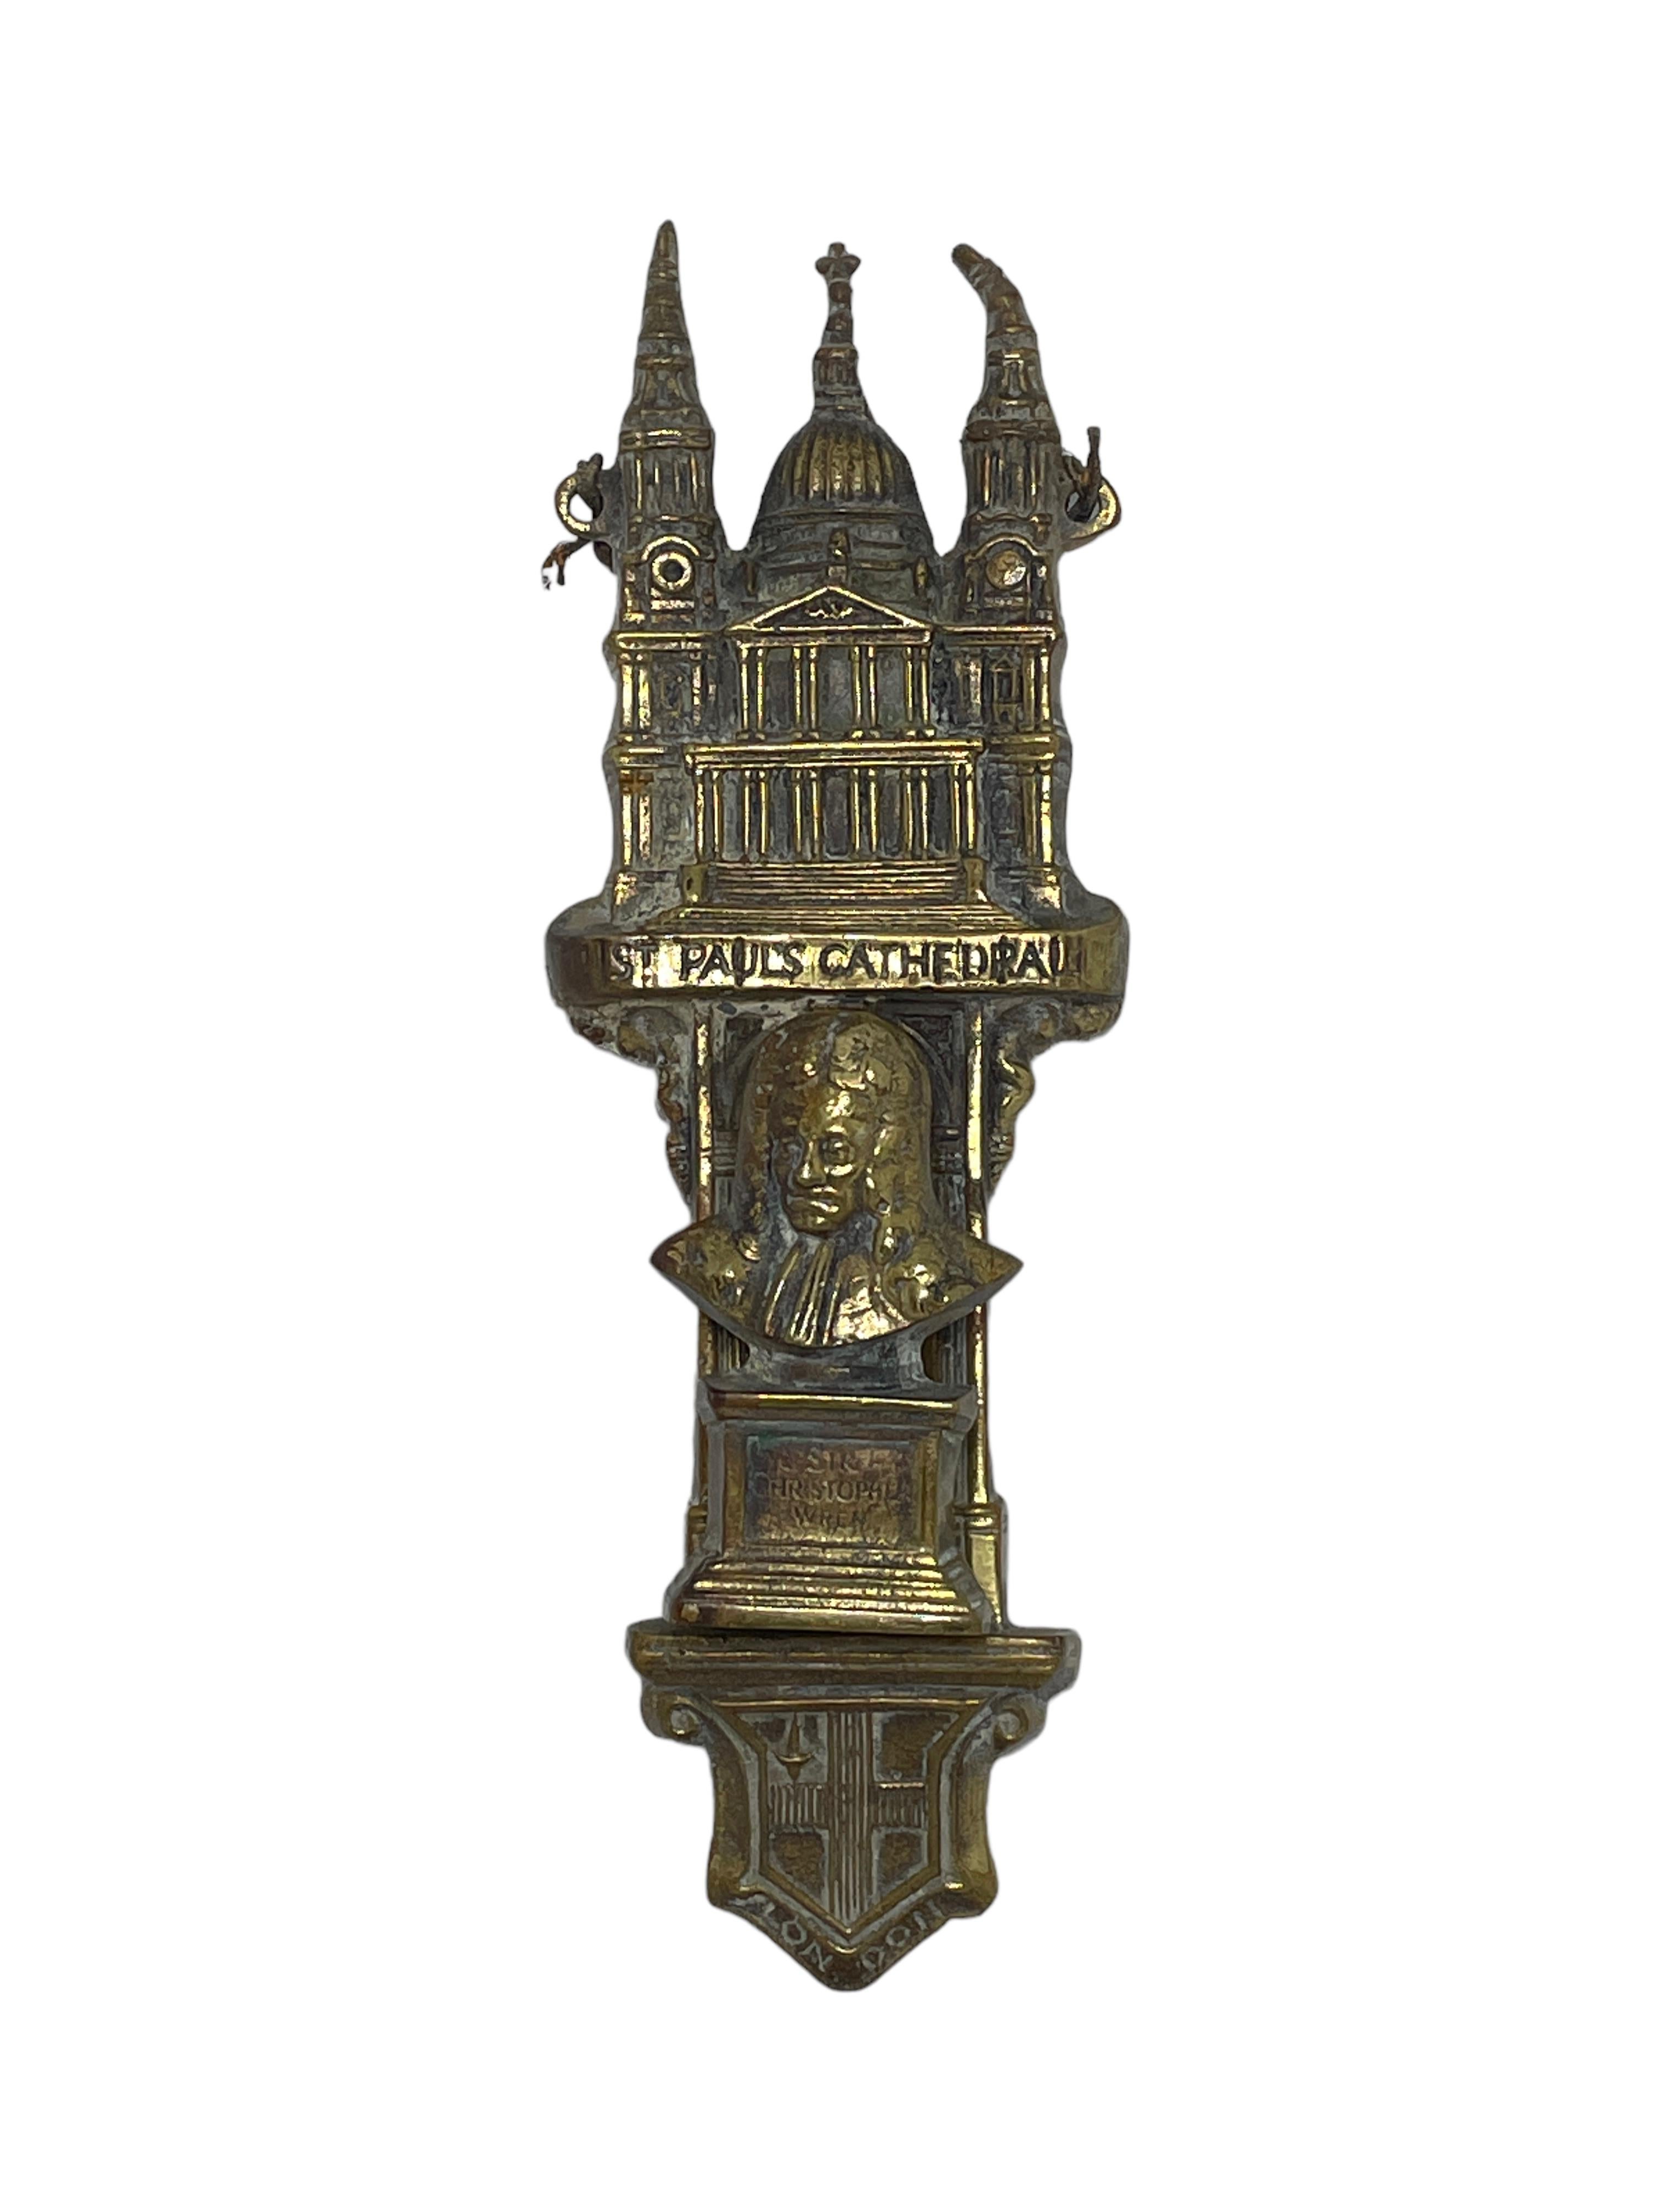 Beautiful St. Pauls Cathedral Door Knocker, Brass or Bronze, England vintage For Sale